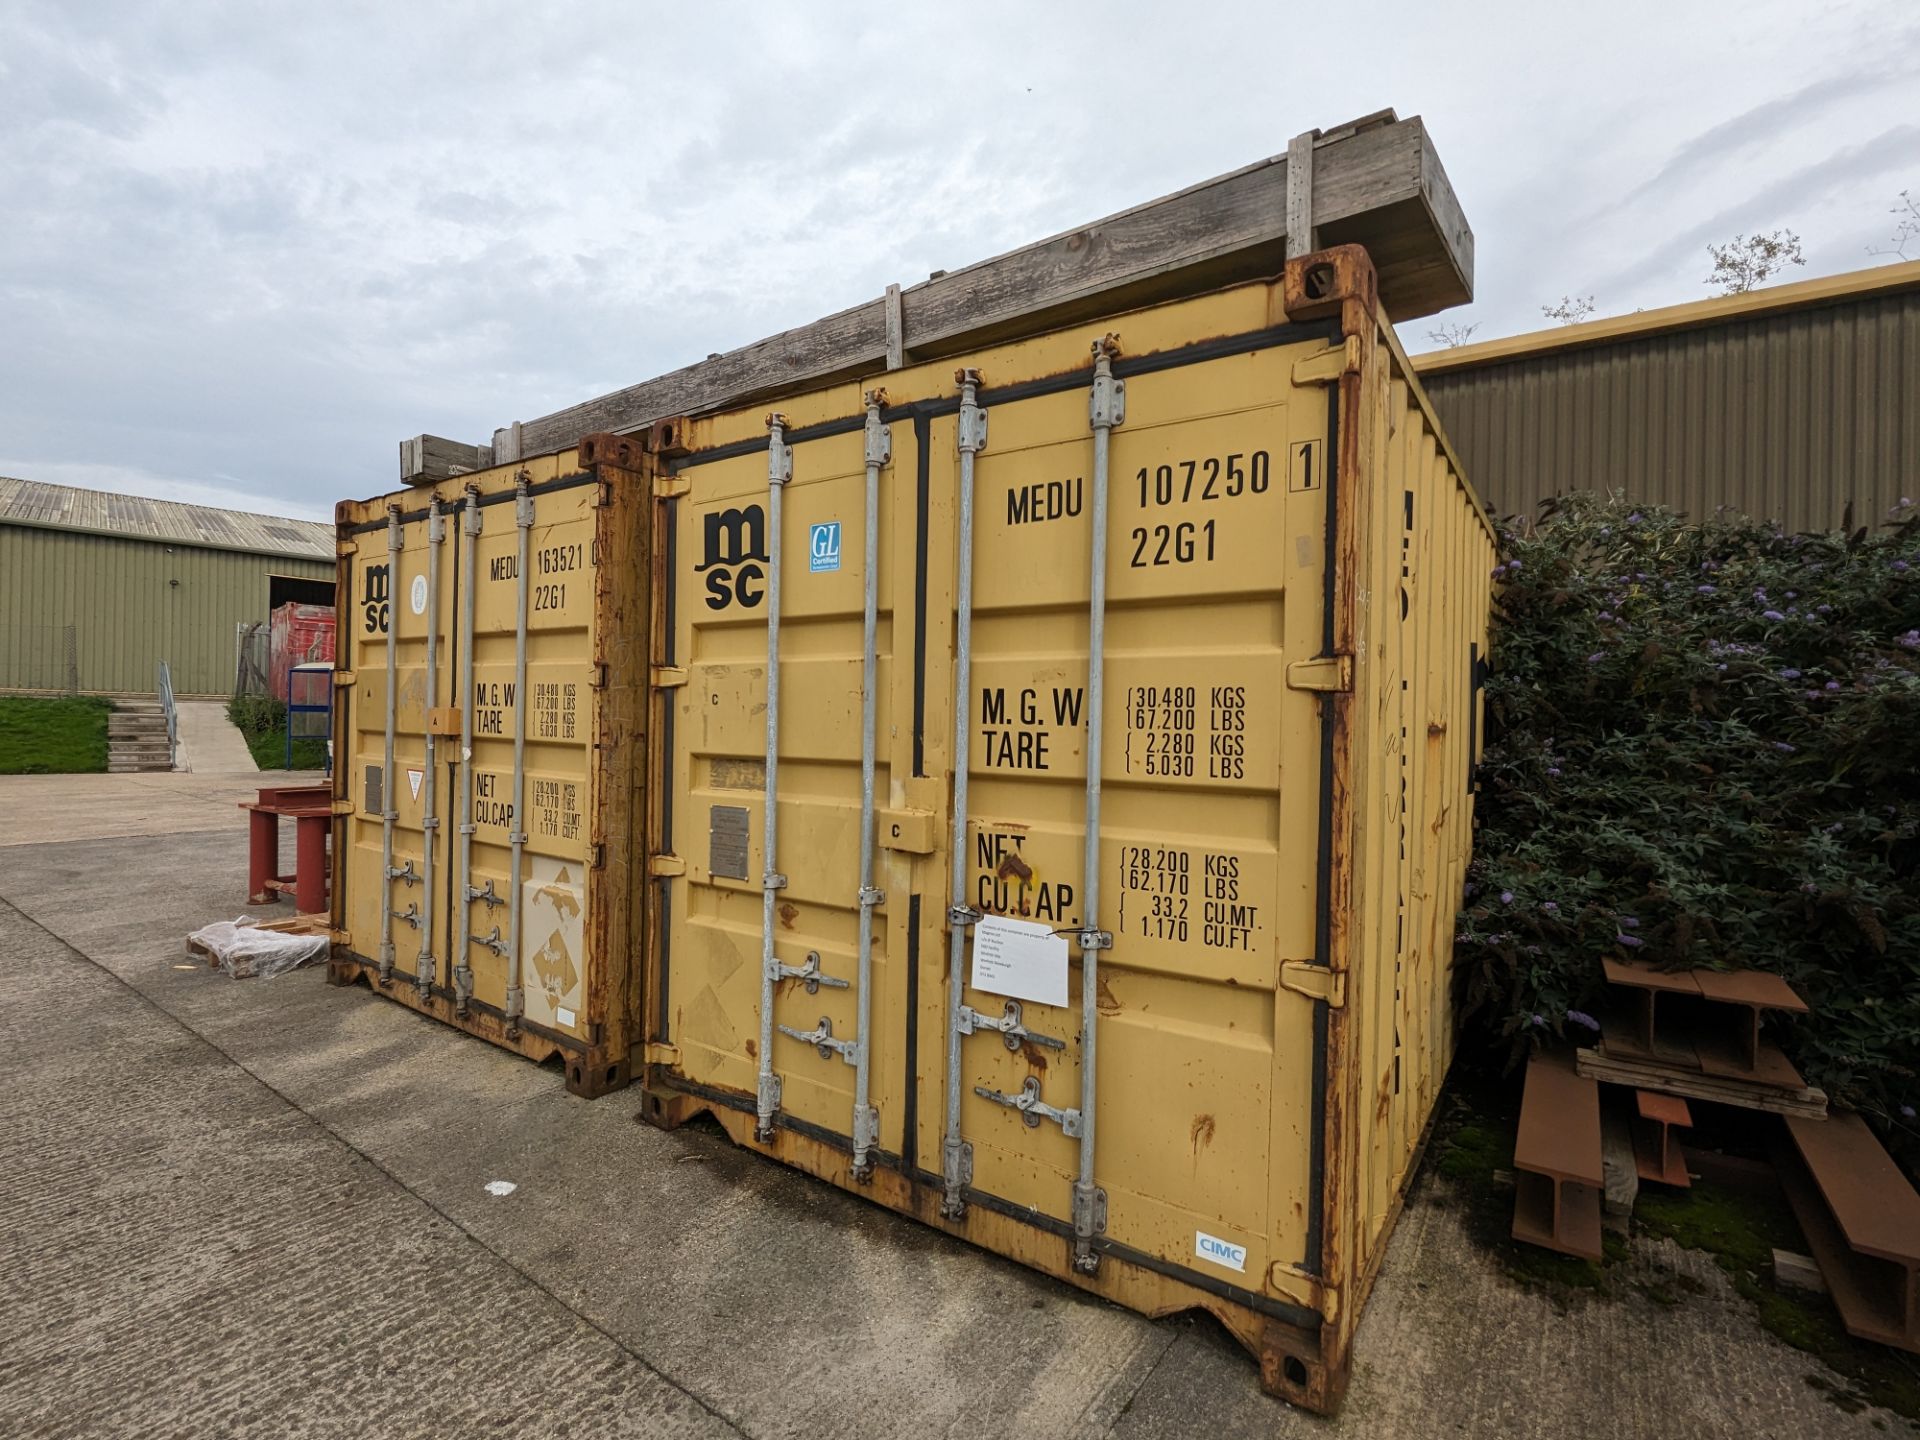 1: Shipping Container (Contents Excluded)